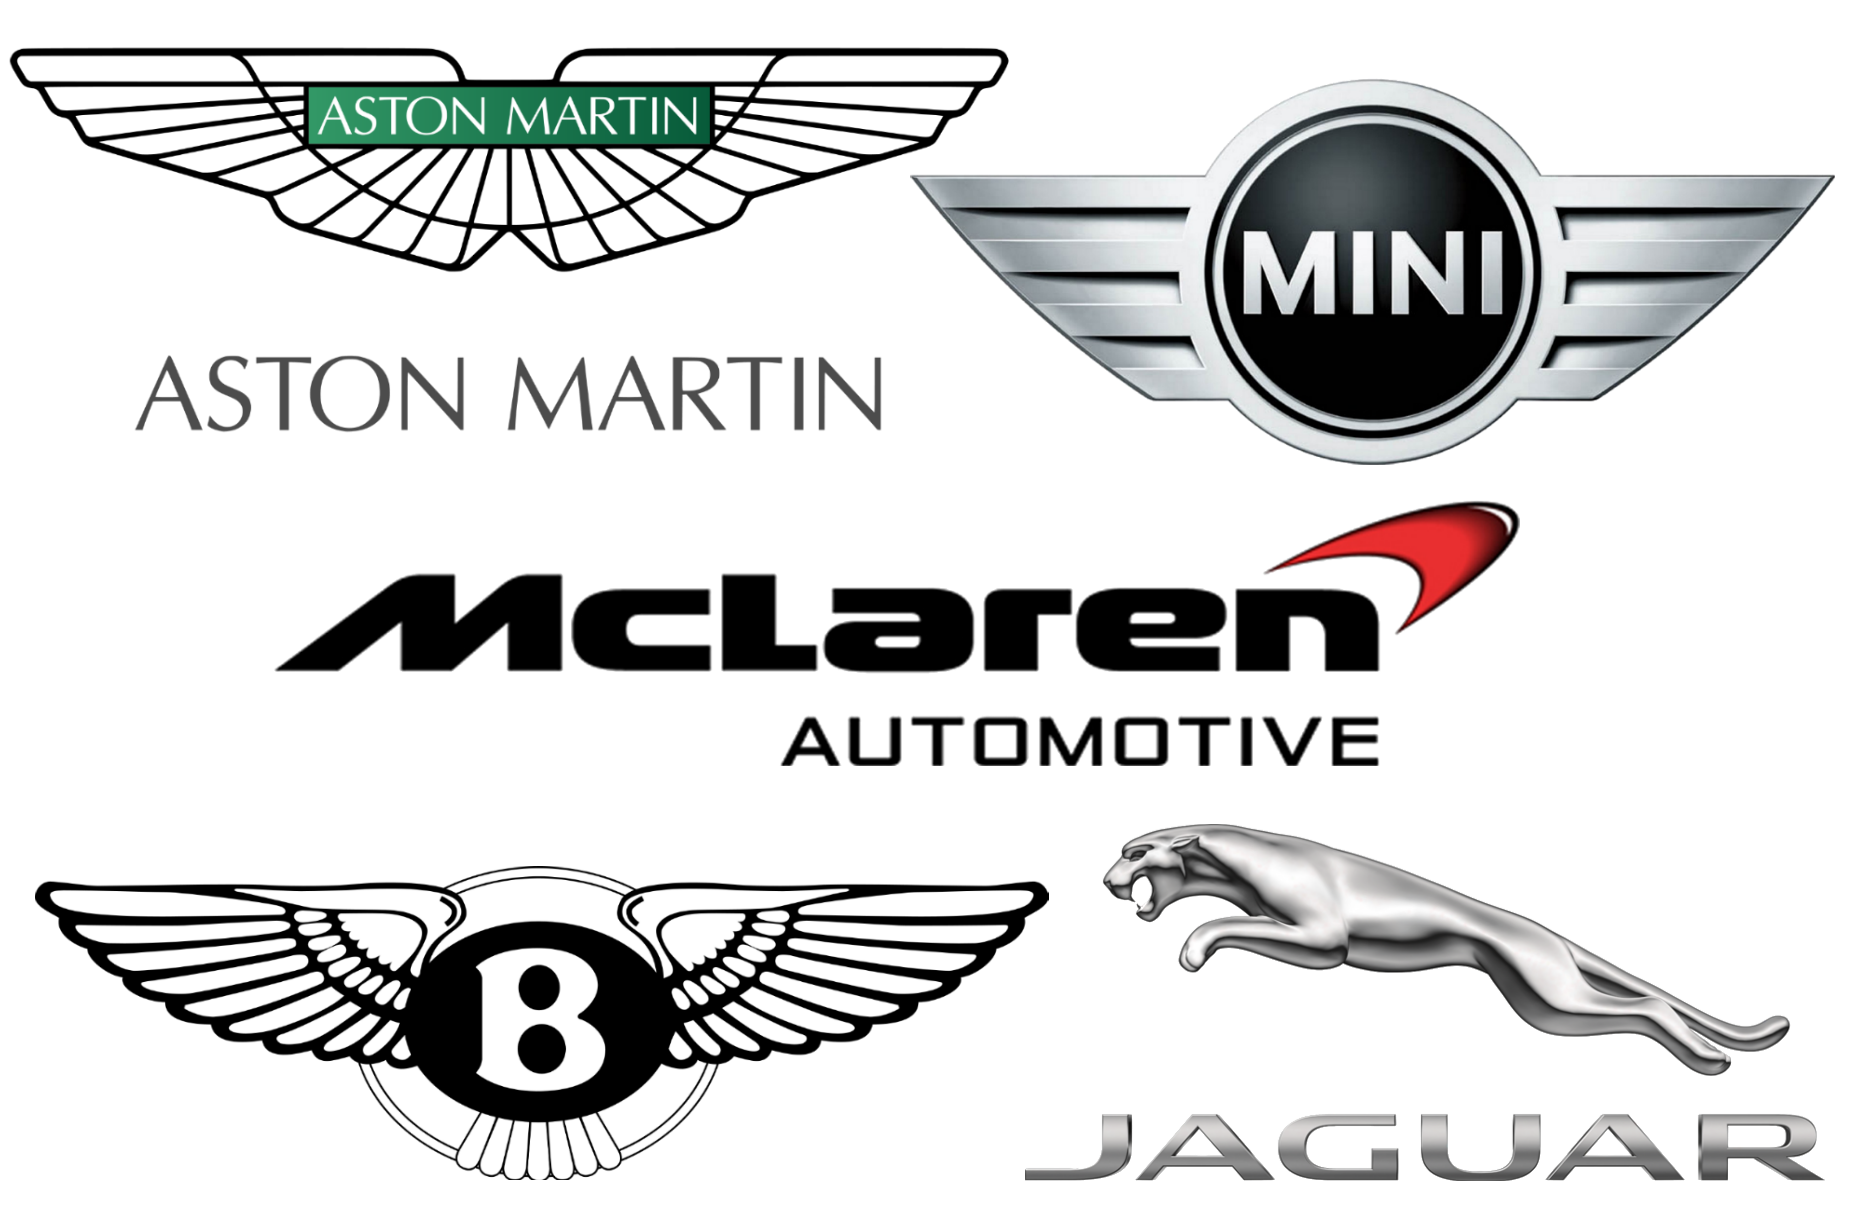 British Car Brands Companies And Manufacturers Car Brands Car Logos Meaning And Symbol